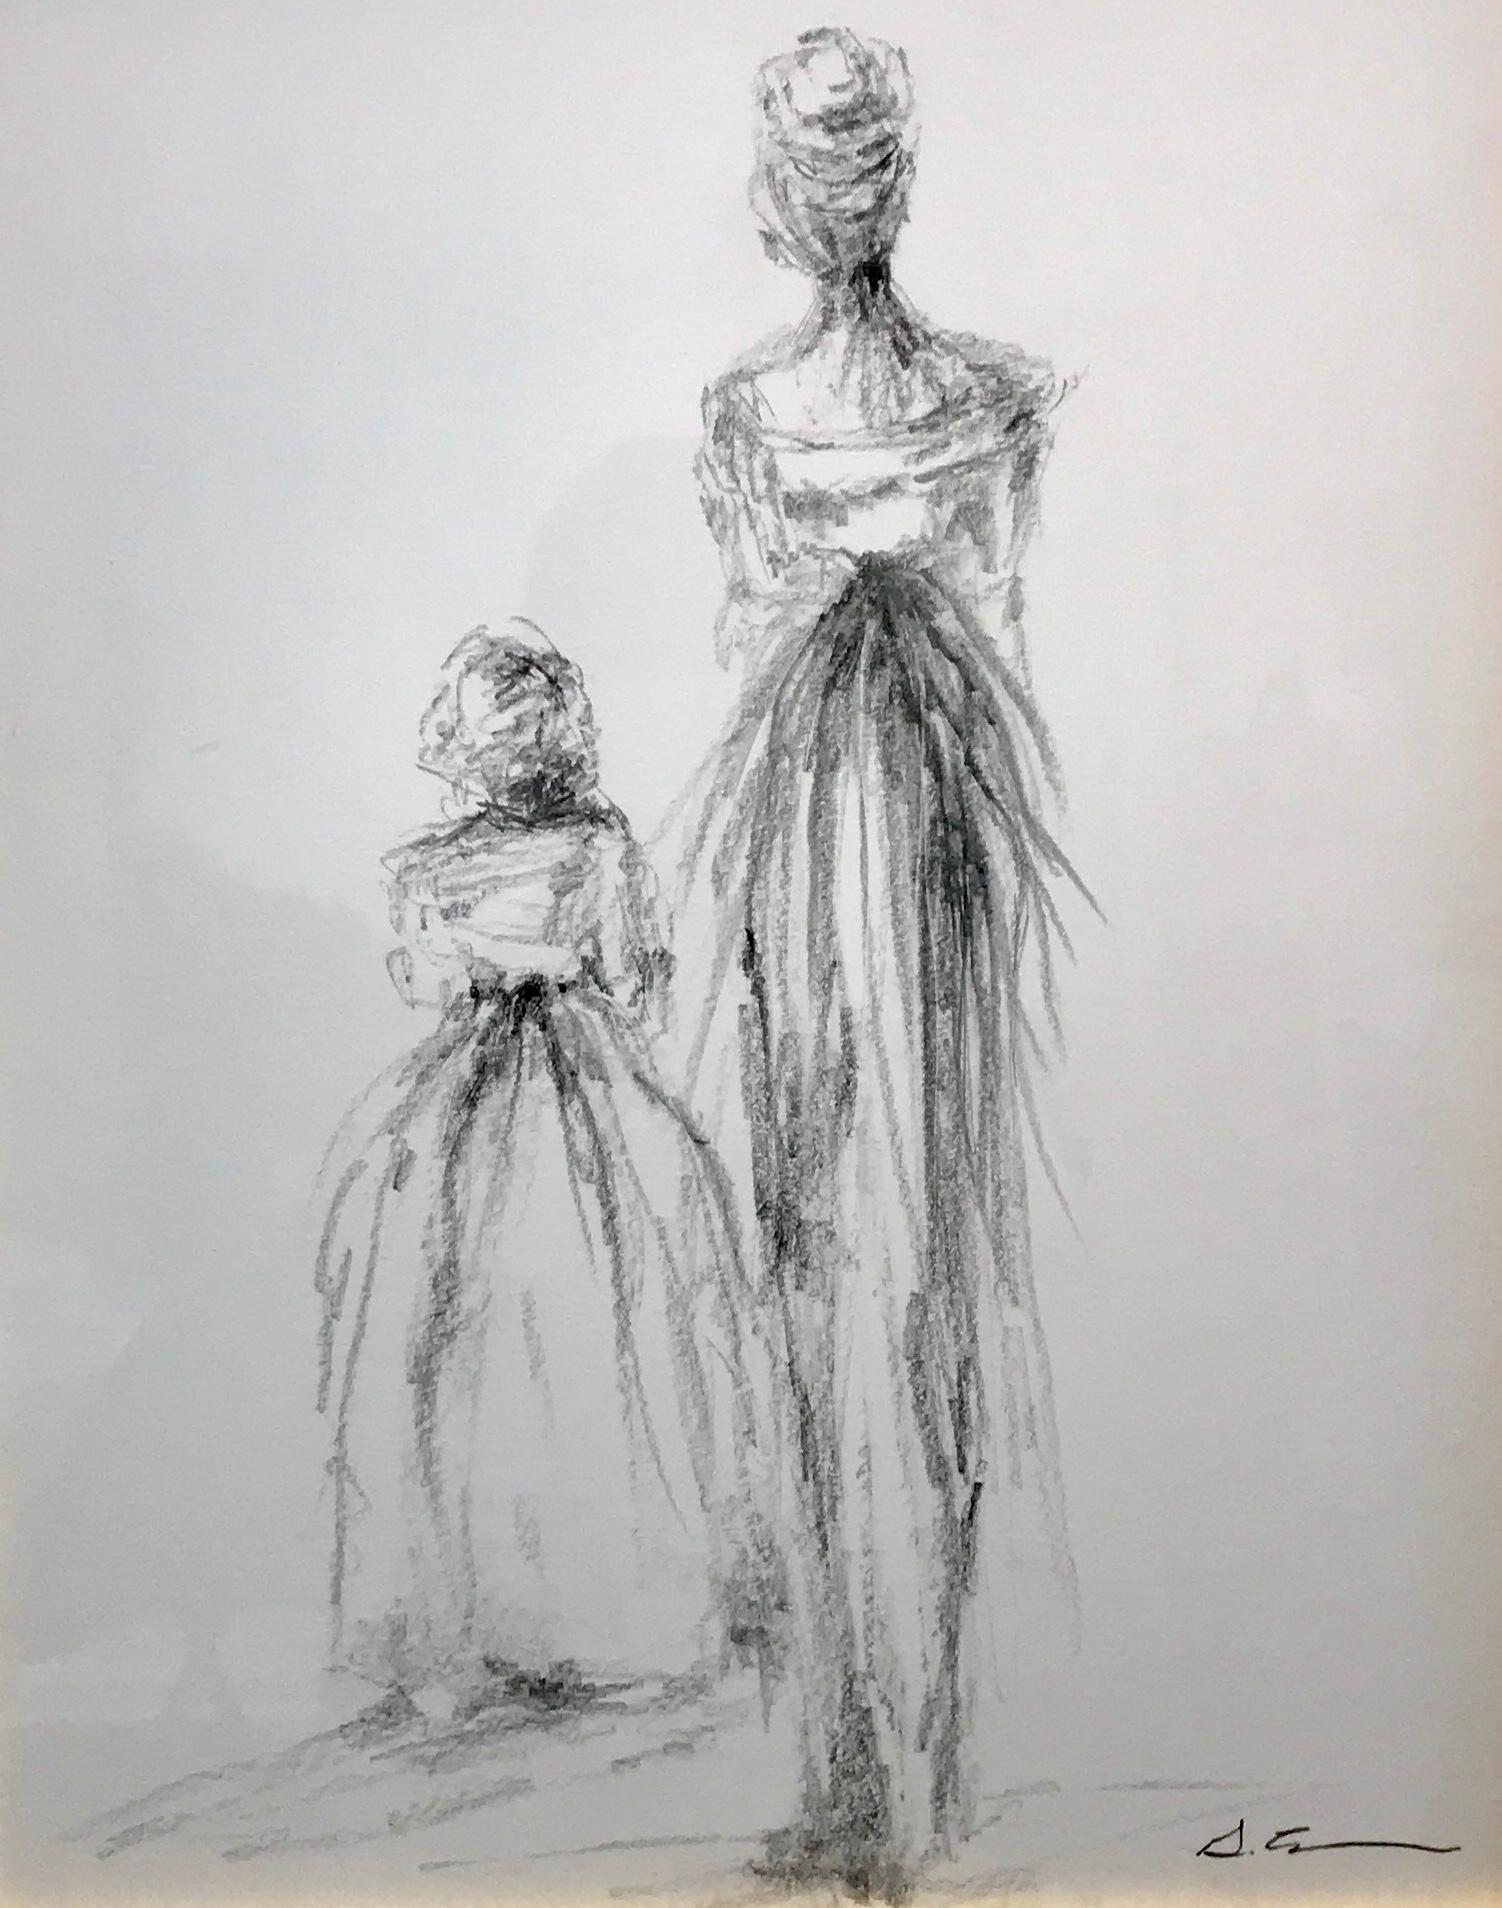 'Mother and Daughter' is a small framed Impressionist monochrome charcoal on paper figurative piece created by American artist Geri Eubanks in 2018. Drawn with an exquisite Impressionist facture, two female figures, a woman and a child wearing